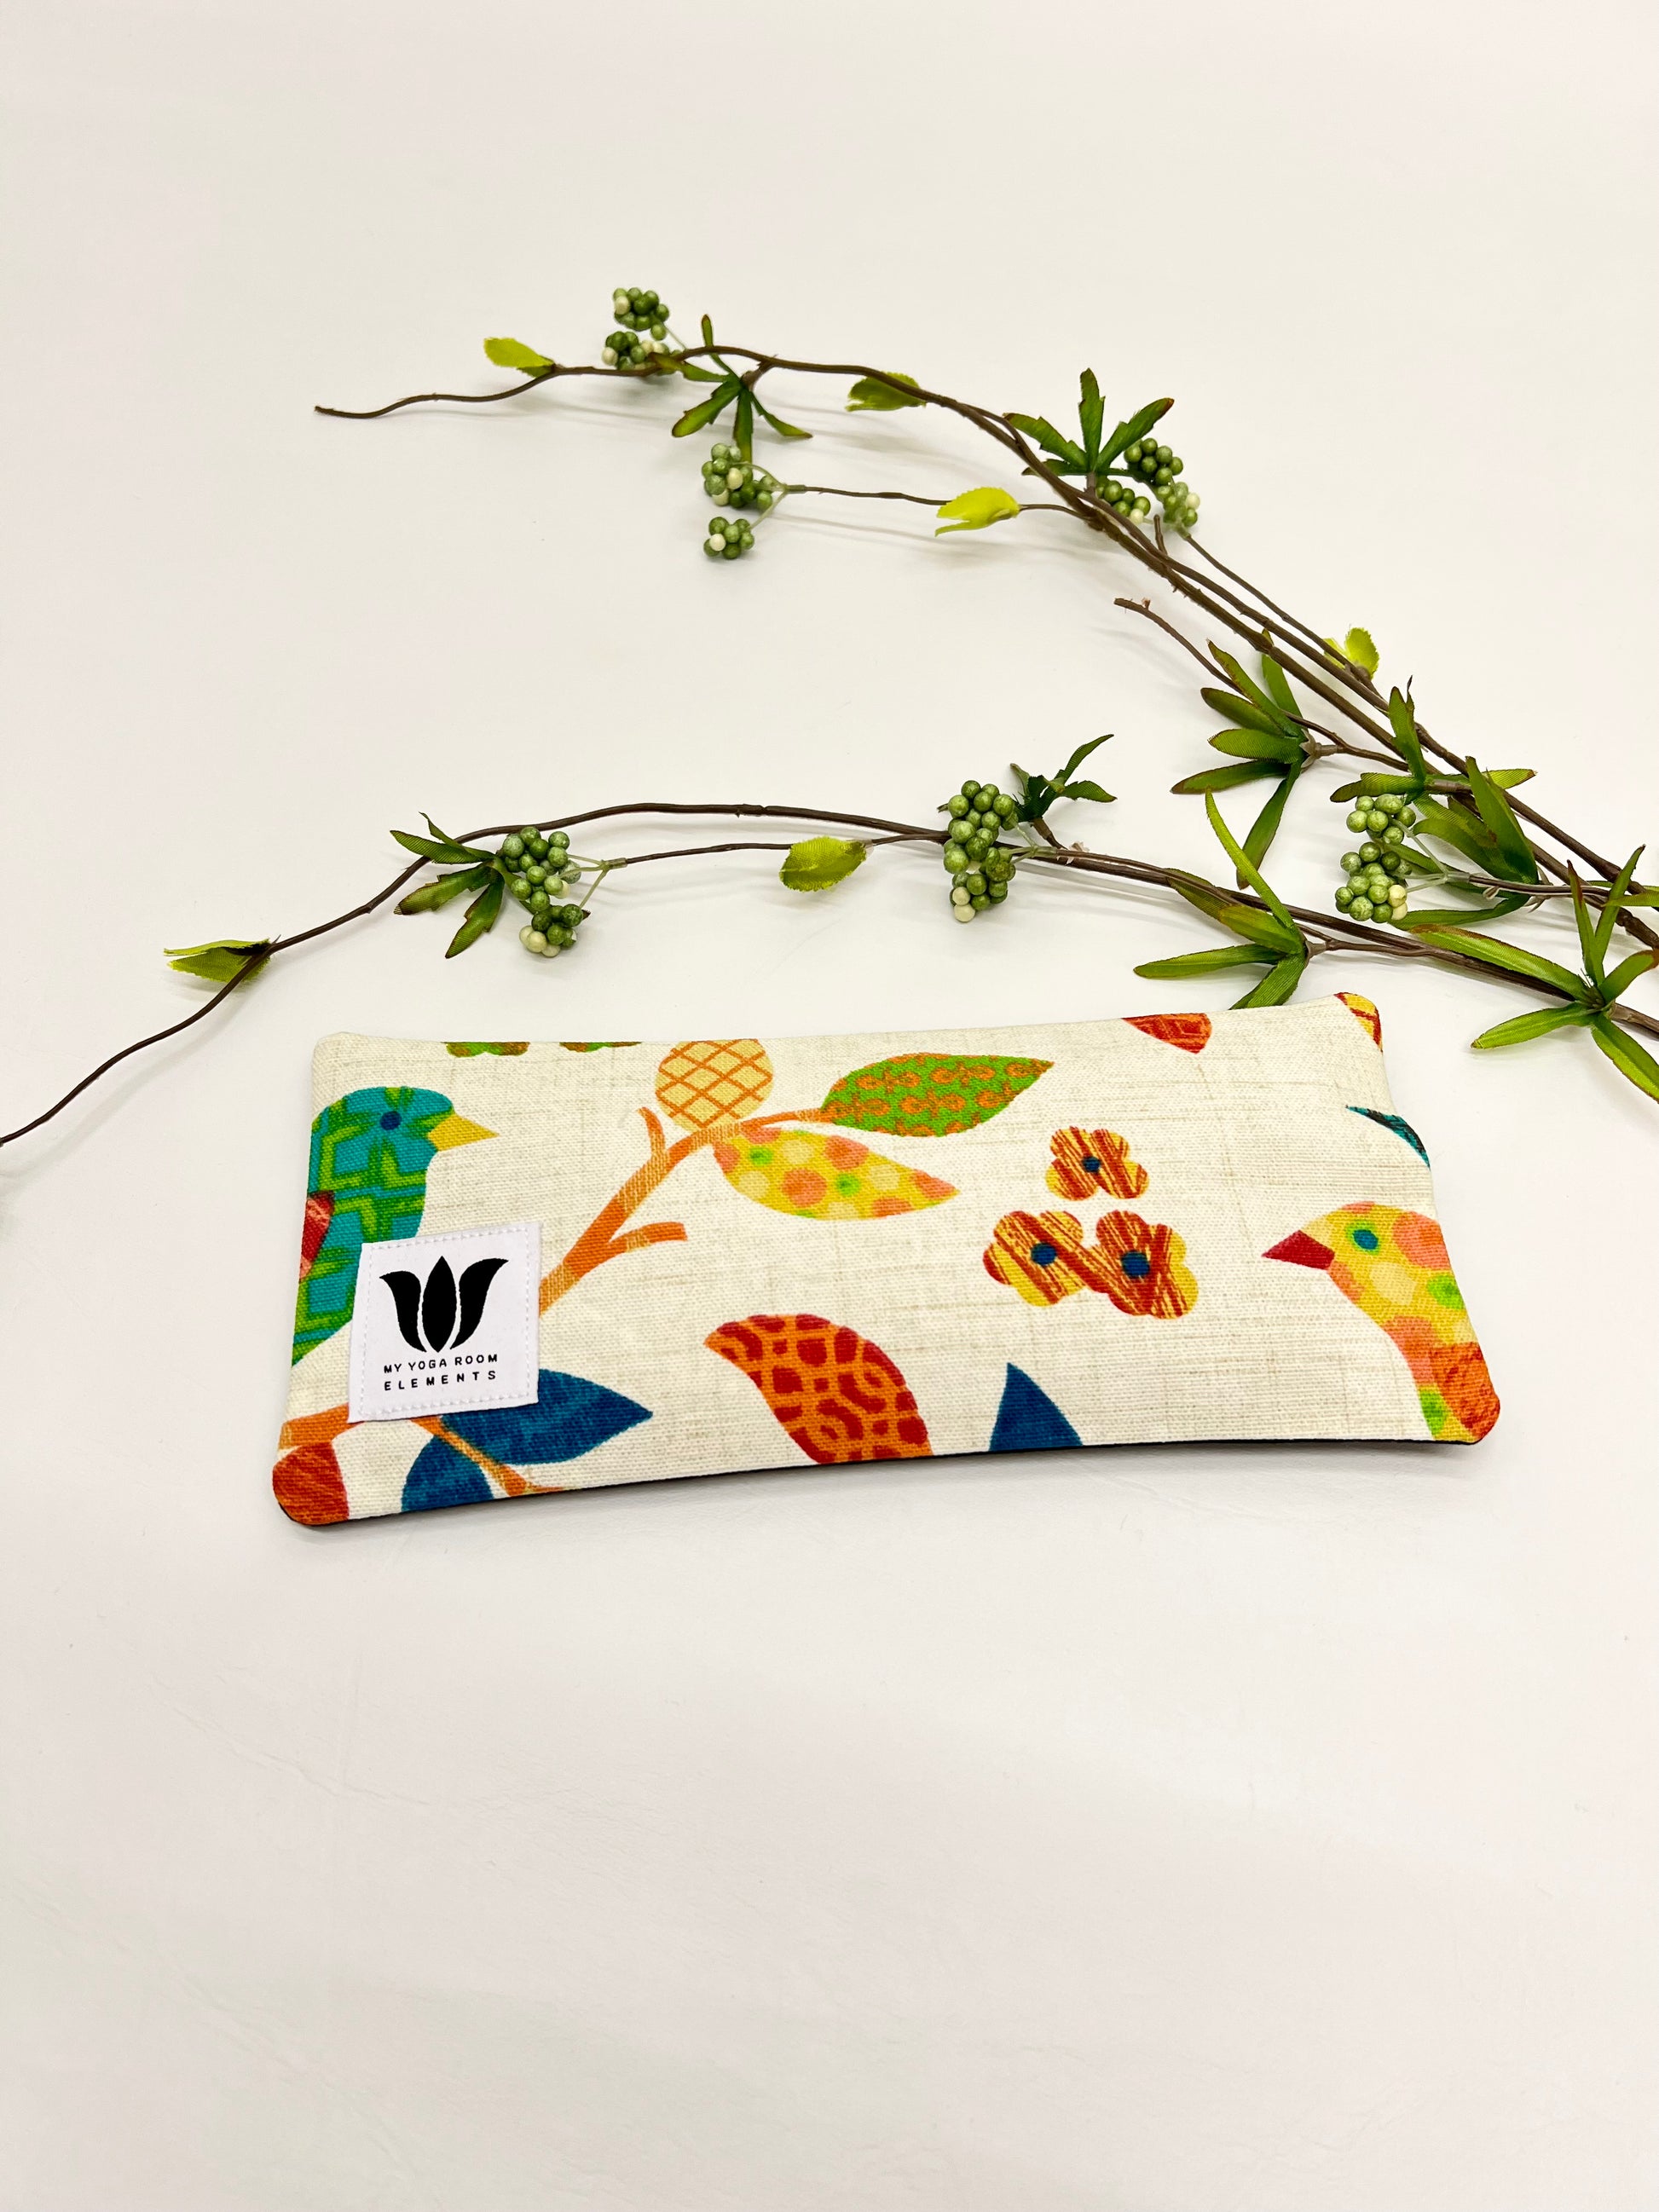 Yoga eye pillow, unscented, therapeutically weighted to soothe eye strain and stress or enhance your savasana. Handcrafted in Canada by My Yoga Room Elements. Rainbow natural print and bamboo fabric.